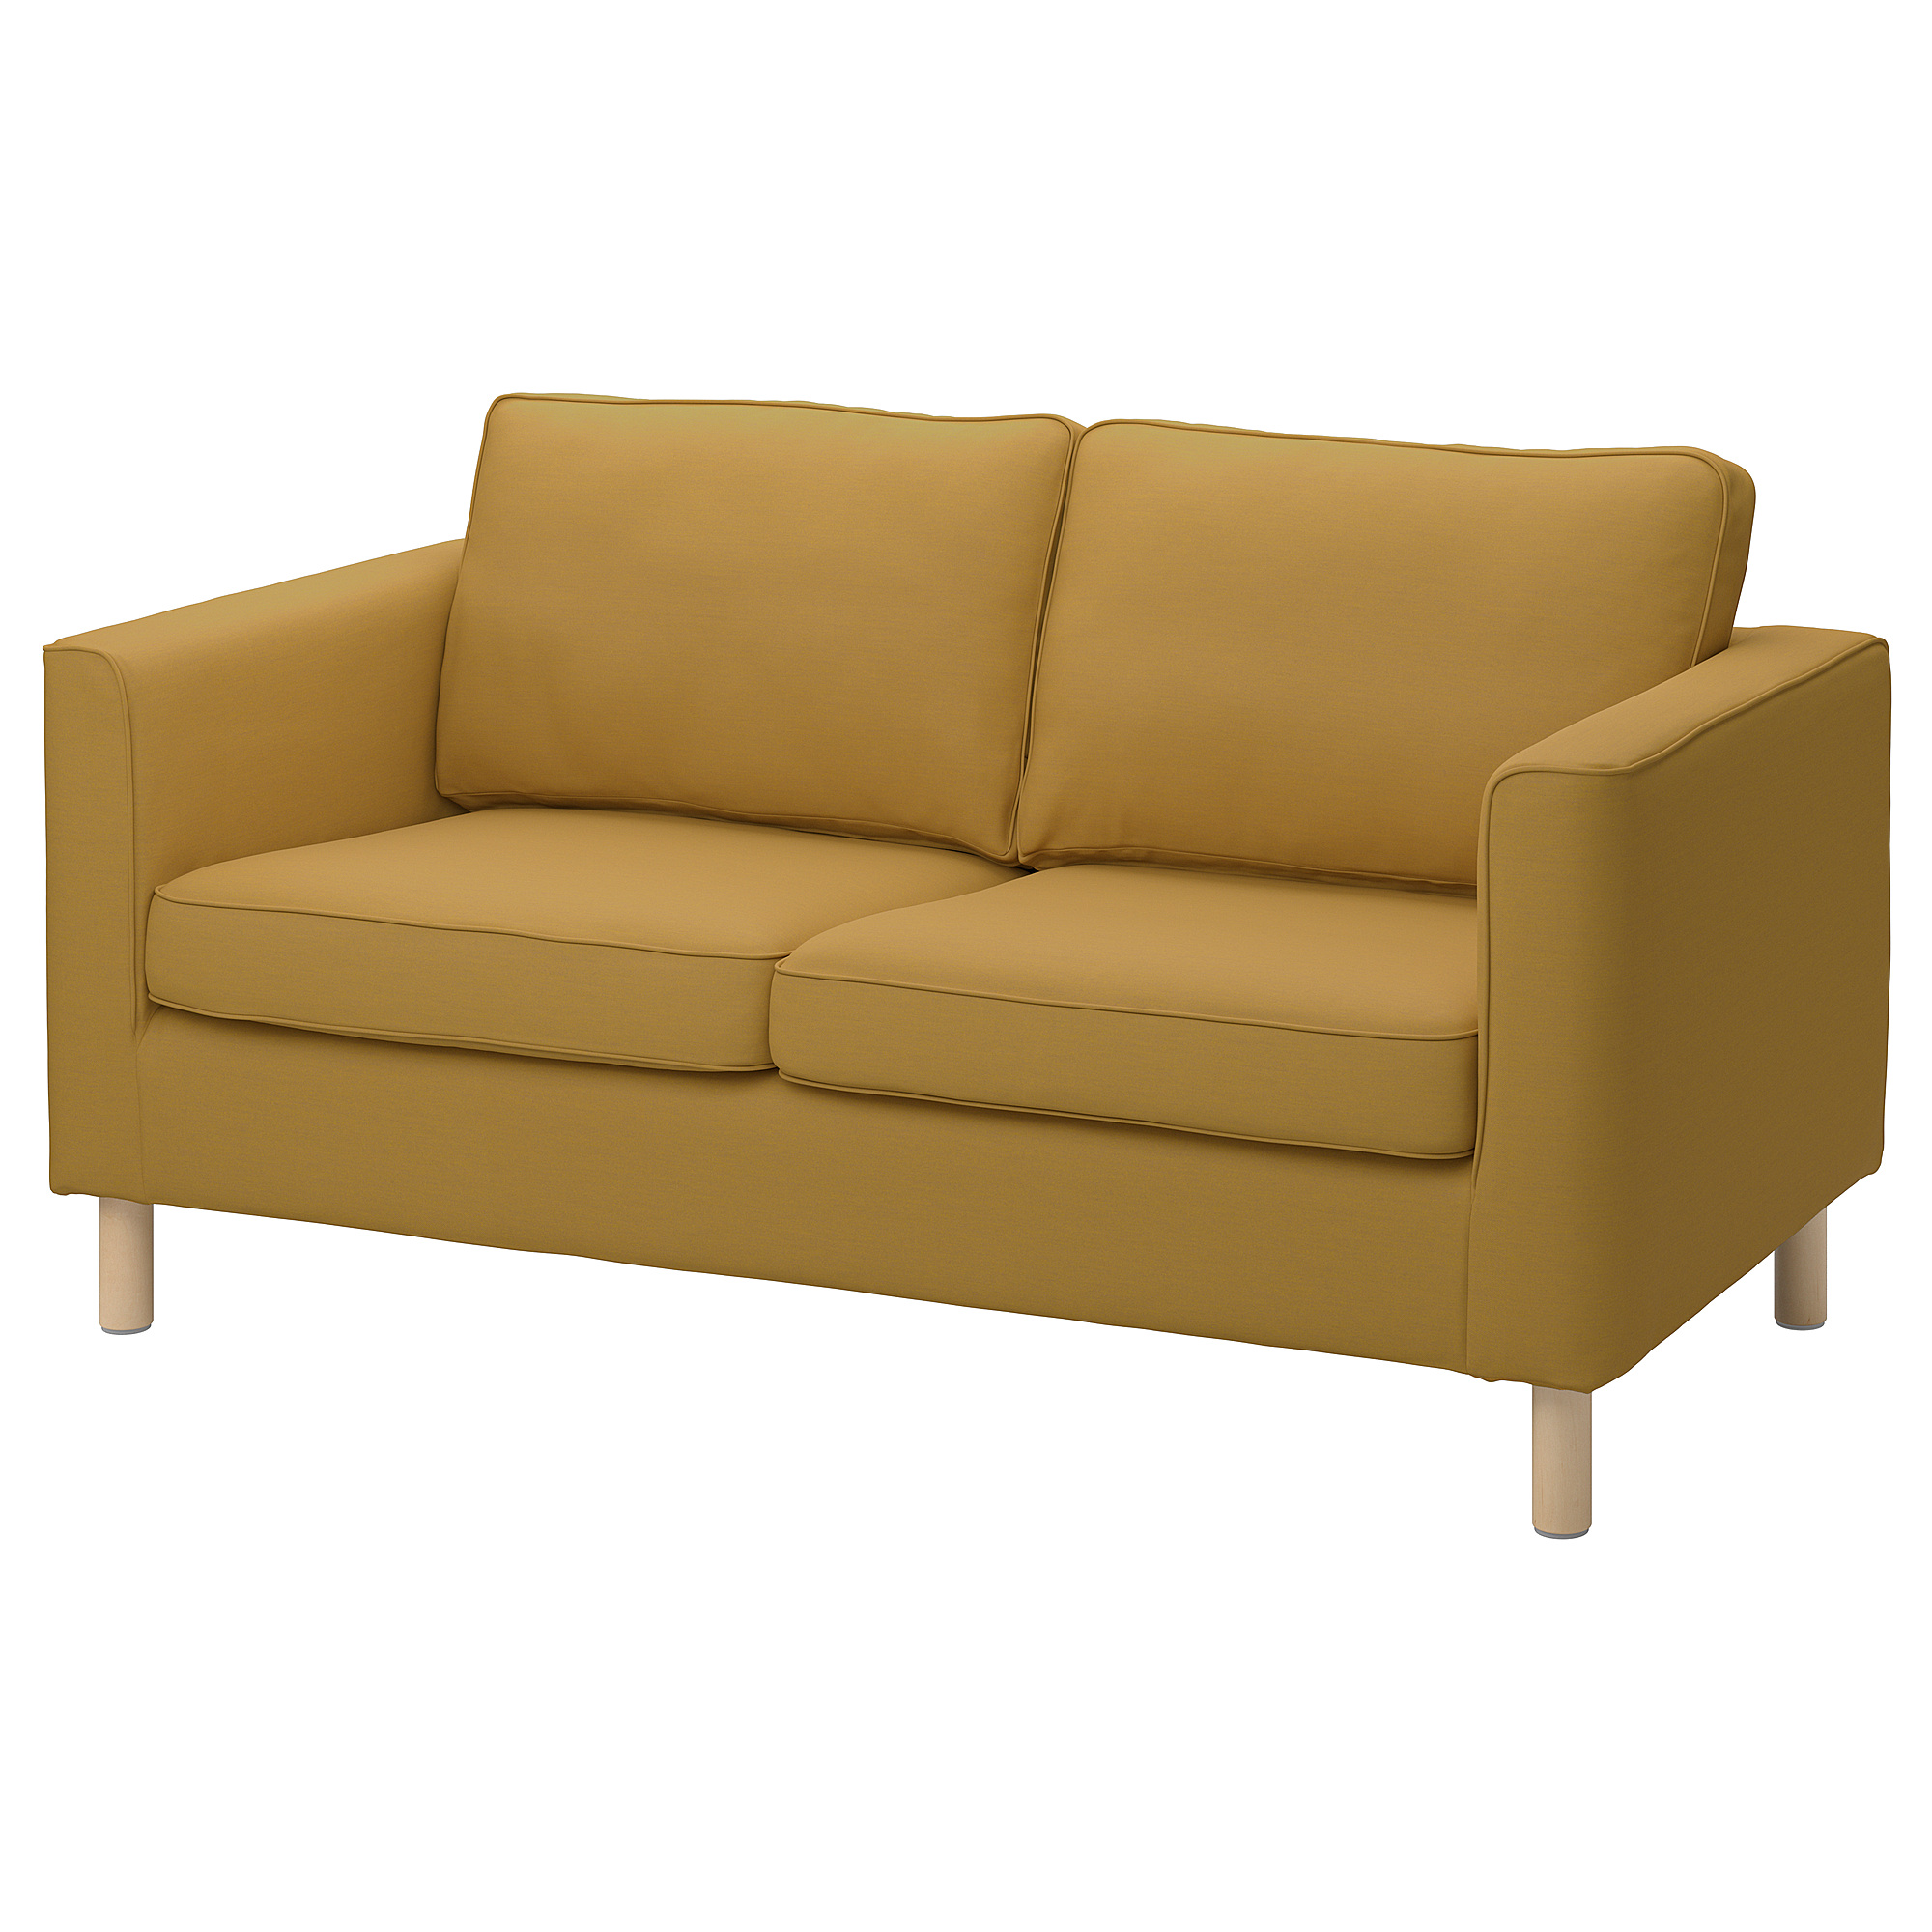 PÄRUP cover for 2-seat sofa